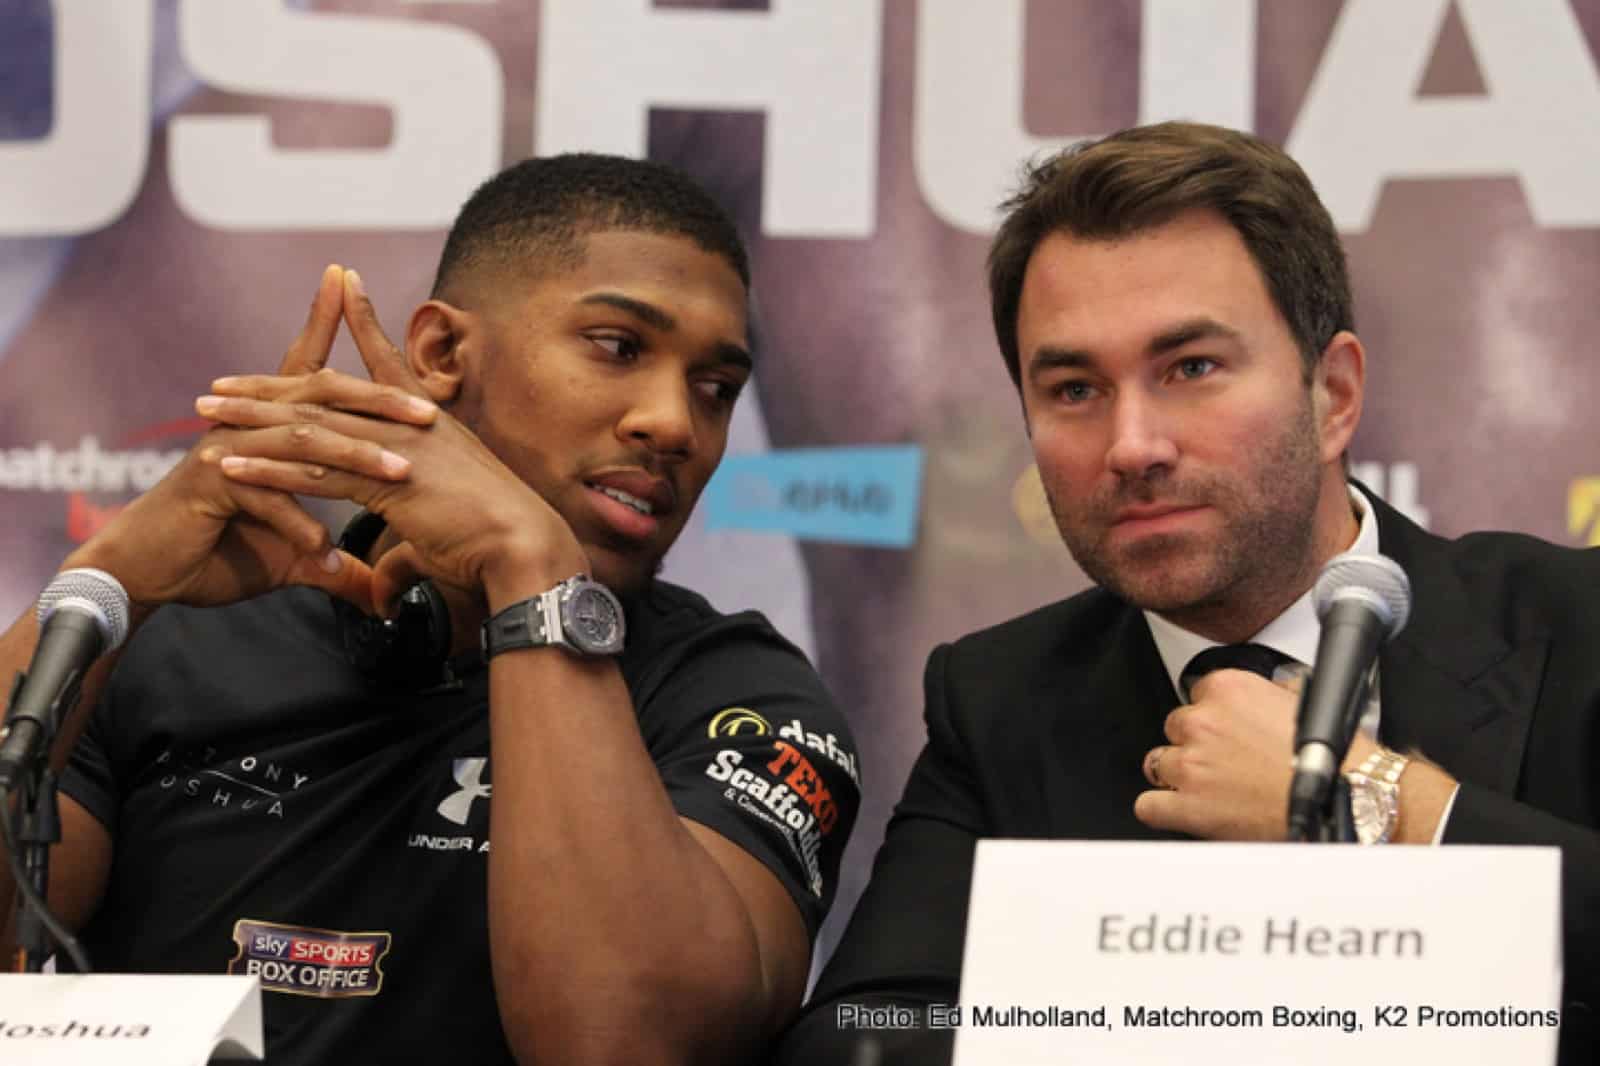 Eddie Hearn Says He Will Let Anthony Joshua Announce His New Trainer – Who Could It Be?